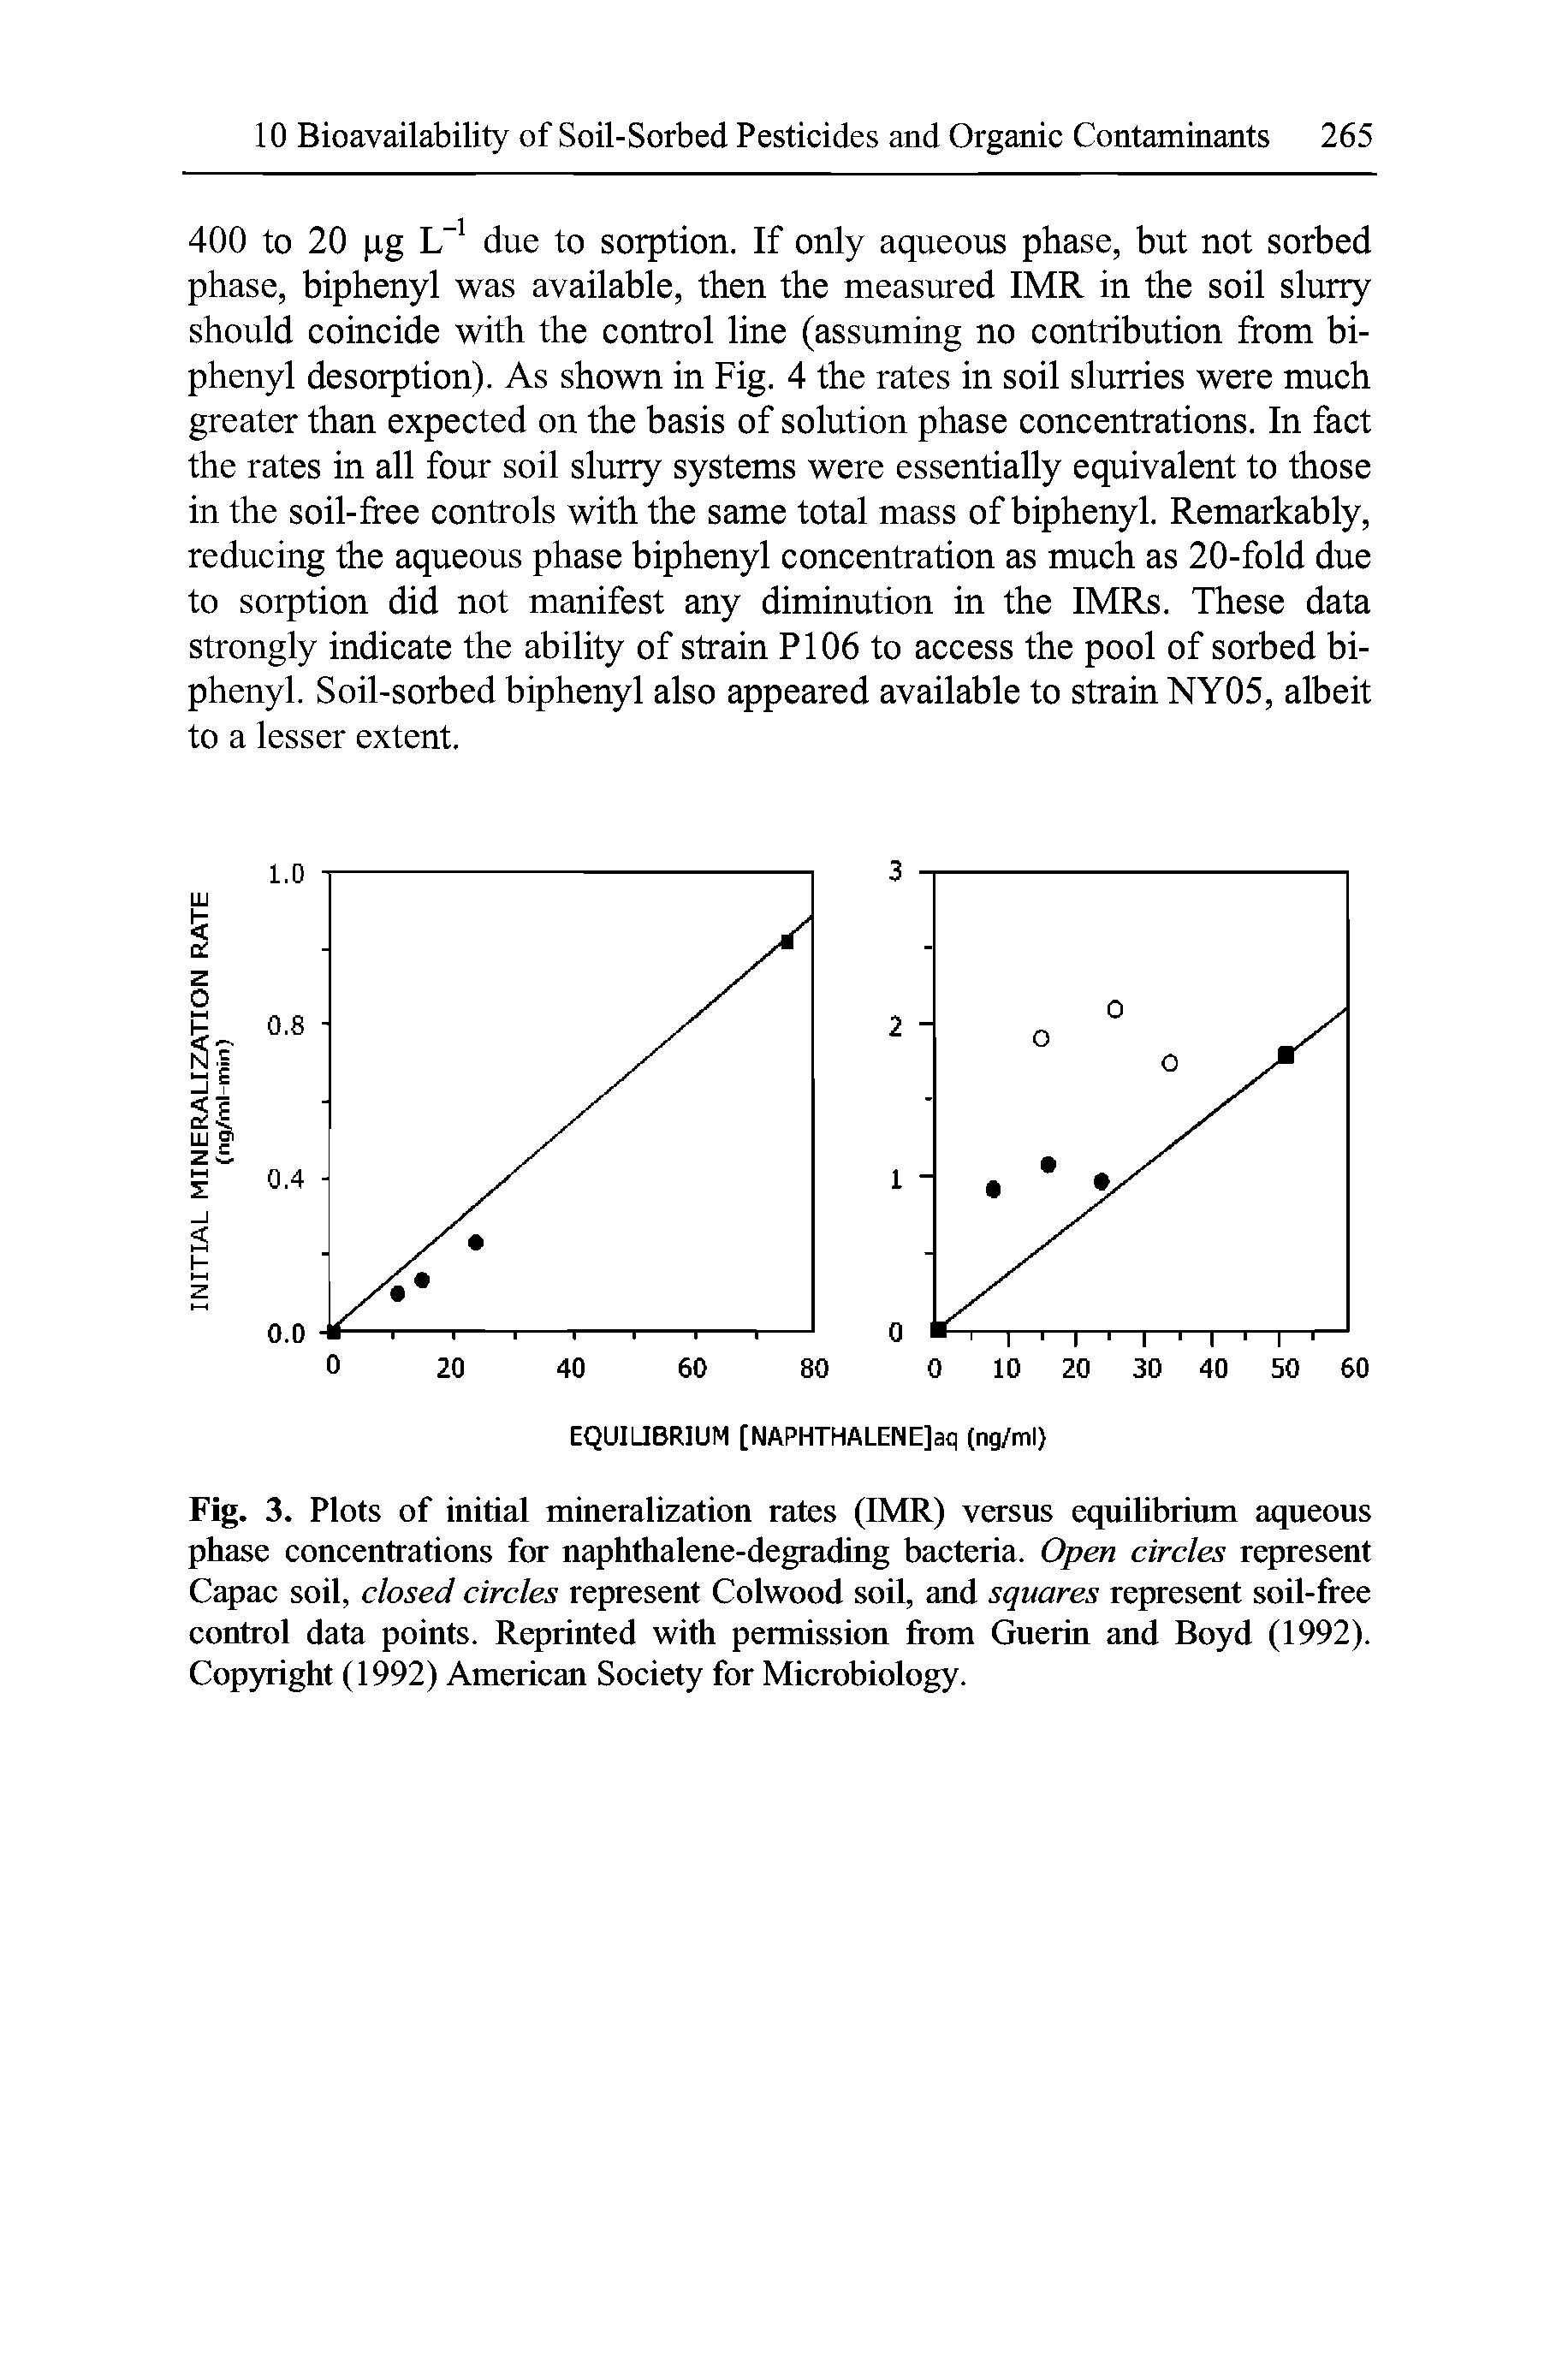 Fig. 3. Plots of initial mineralization rates (IMR) versus equilibrium aqueous phase concentrations for naphthalene-degrading bacteria. Open circles represent Capac soil, closed circles represent Colwood soil, and squares represent soil-free control data points. Reprinted with permission from Guerin and Boyd (1992). Copyright (1992) American Society for Microbiology.